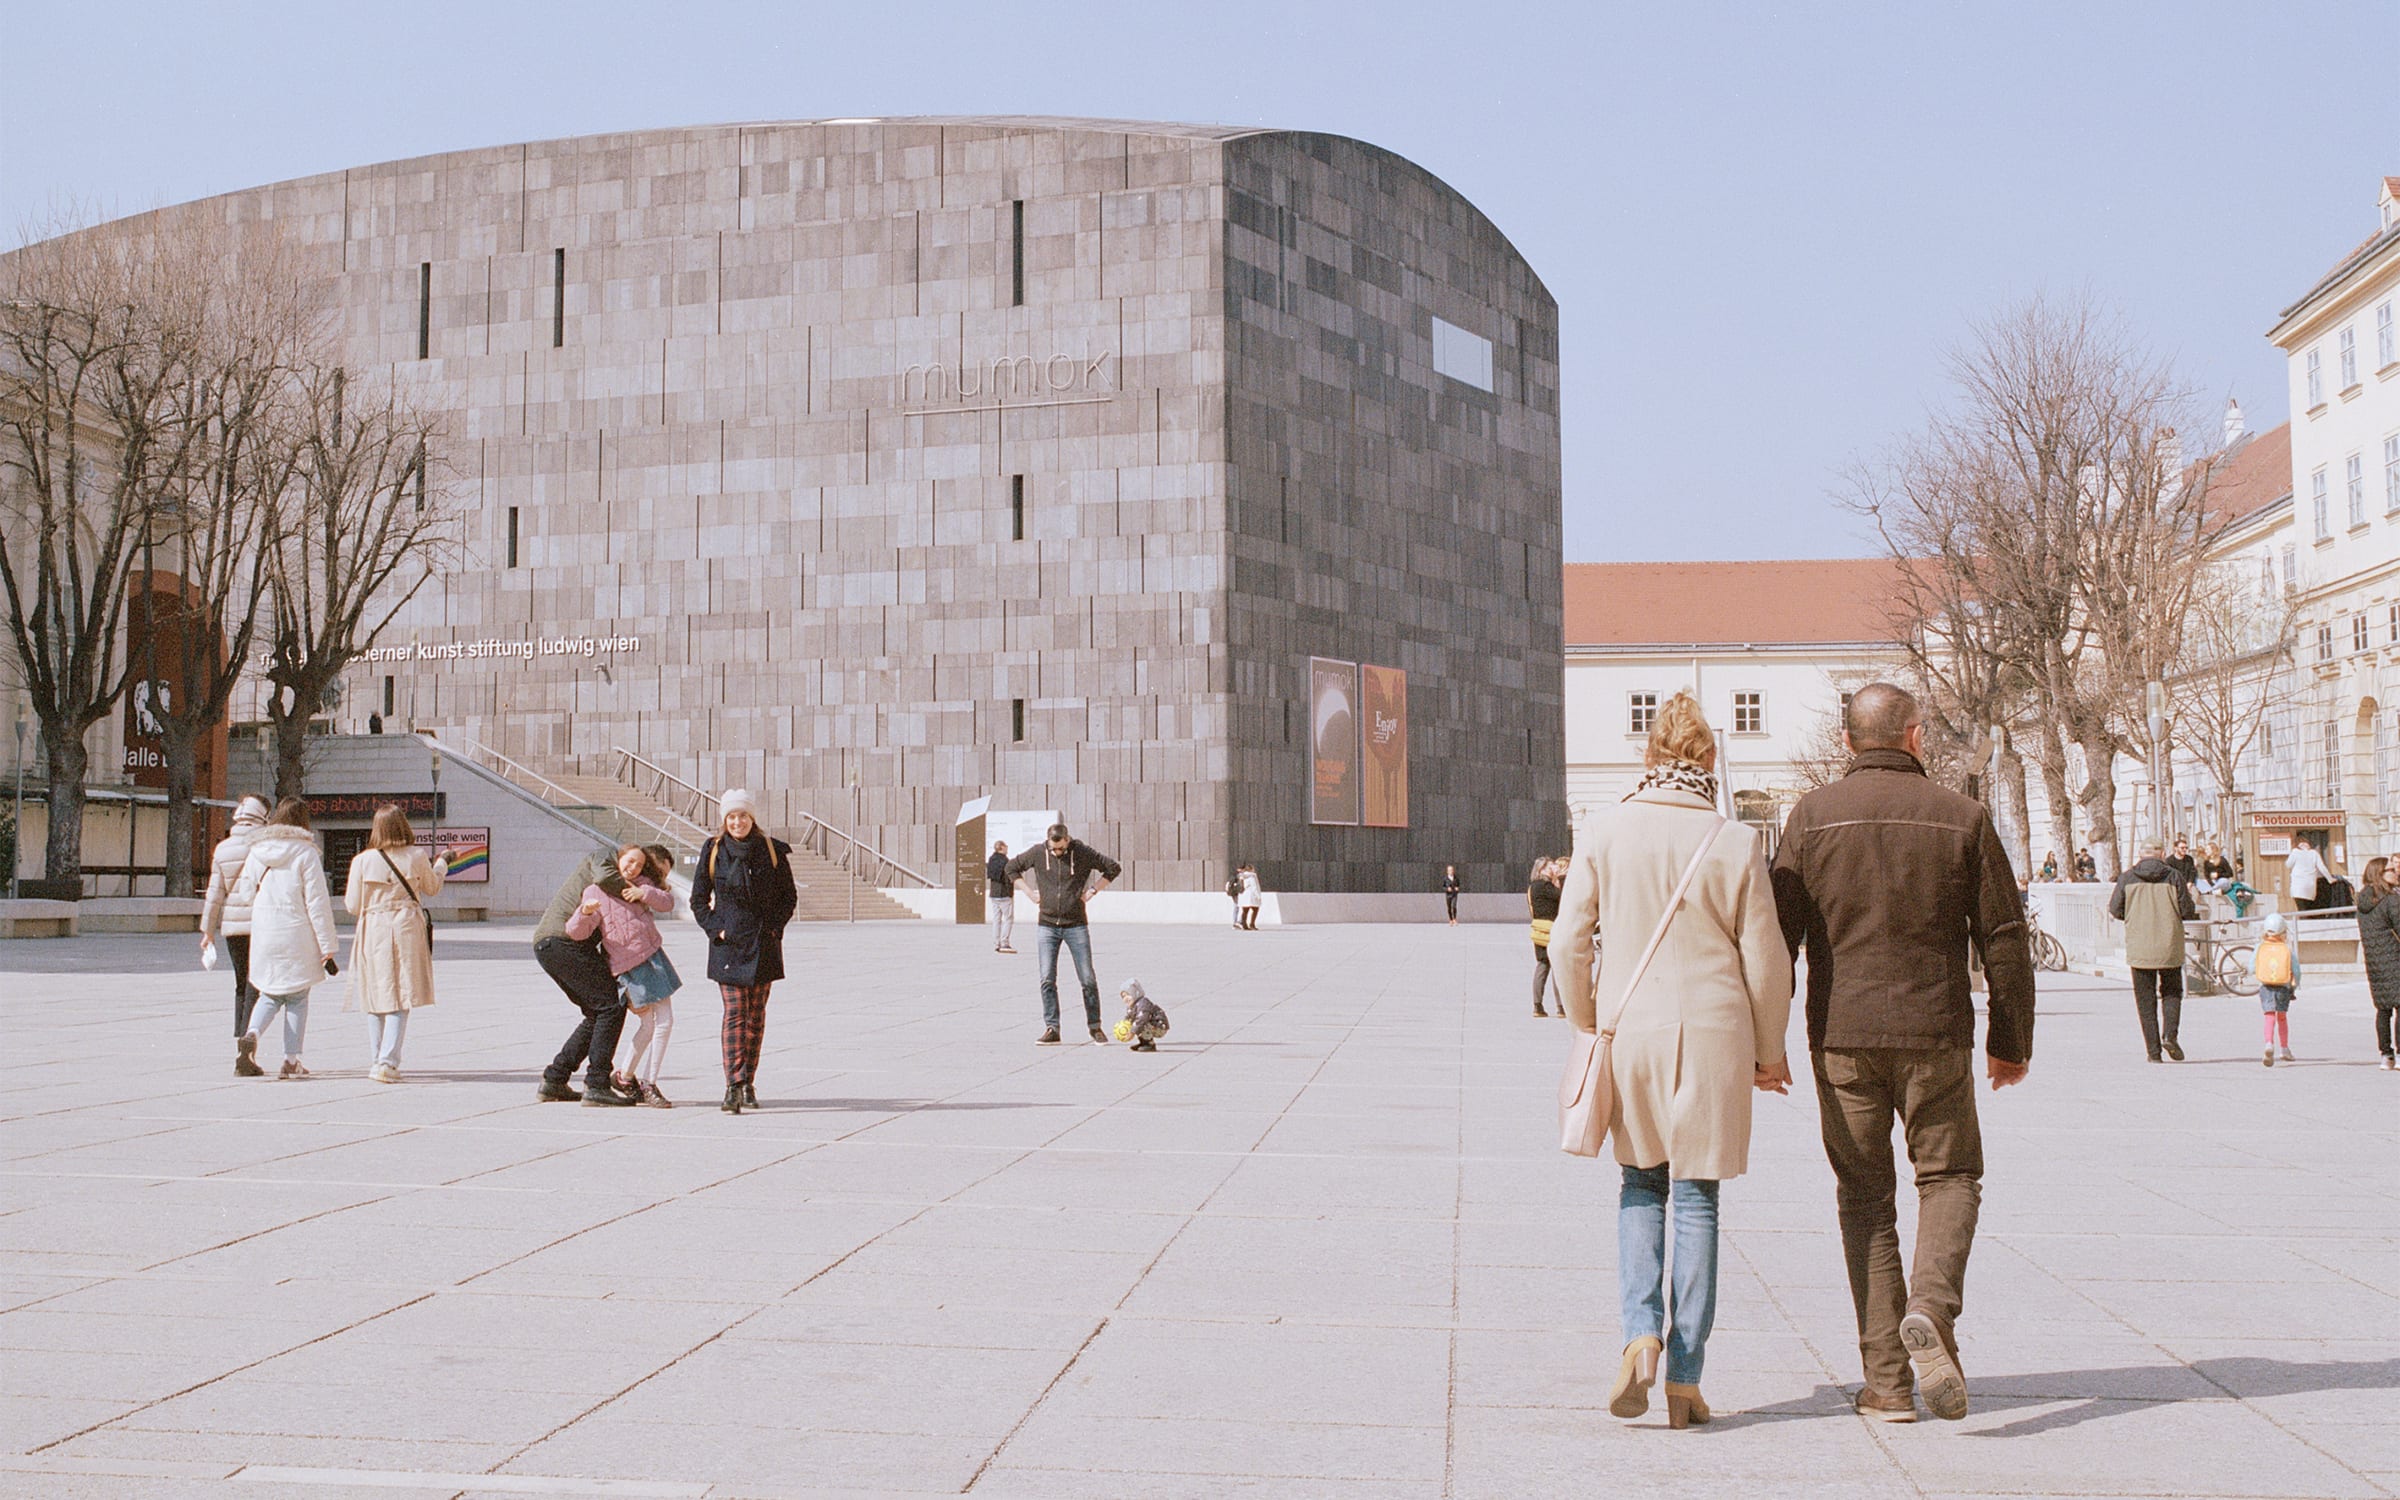 Visitors strolling through the Museumsquartier, the former imperial stables converted into one of Europe's largest museum hubs. The contemporary building houses mumok, the city's main museum for Modern and contemporary art. Photo by Verena Gotthardt for Art Basel.